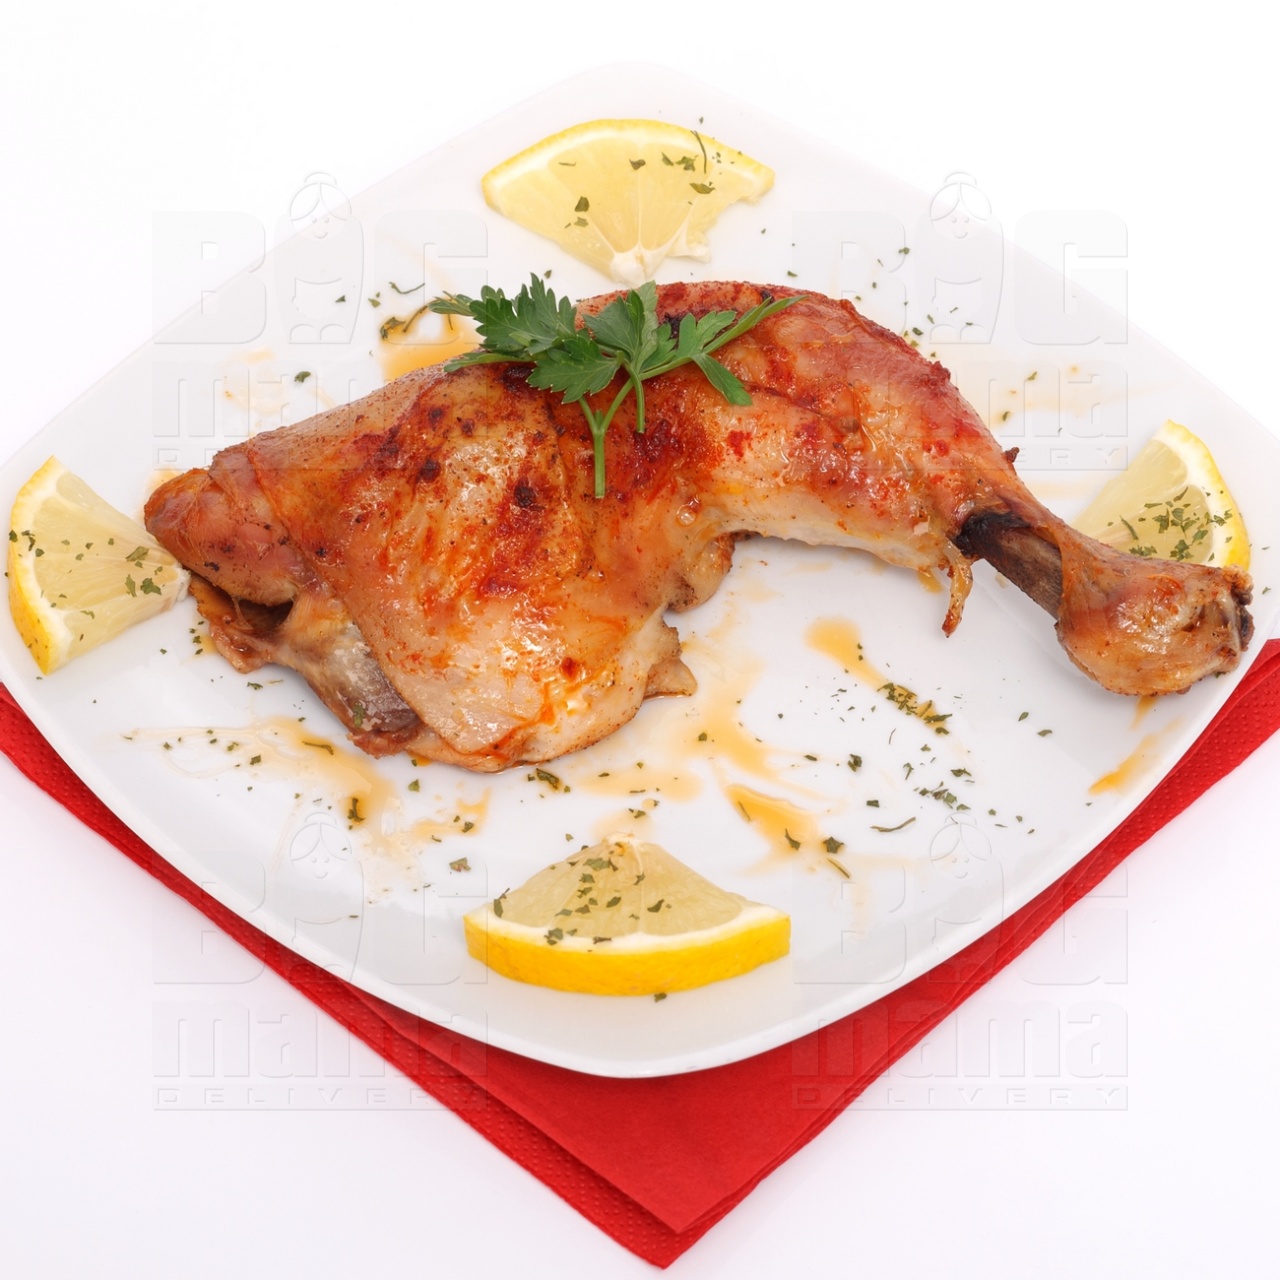 Product #14 image - Chicken legs fried in oven